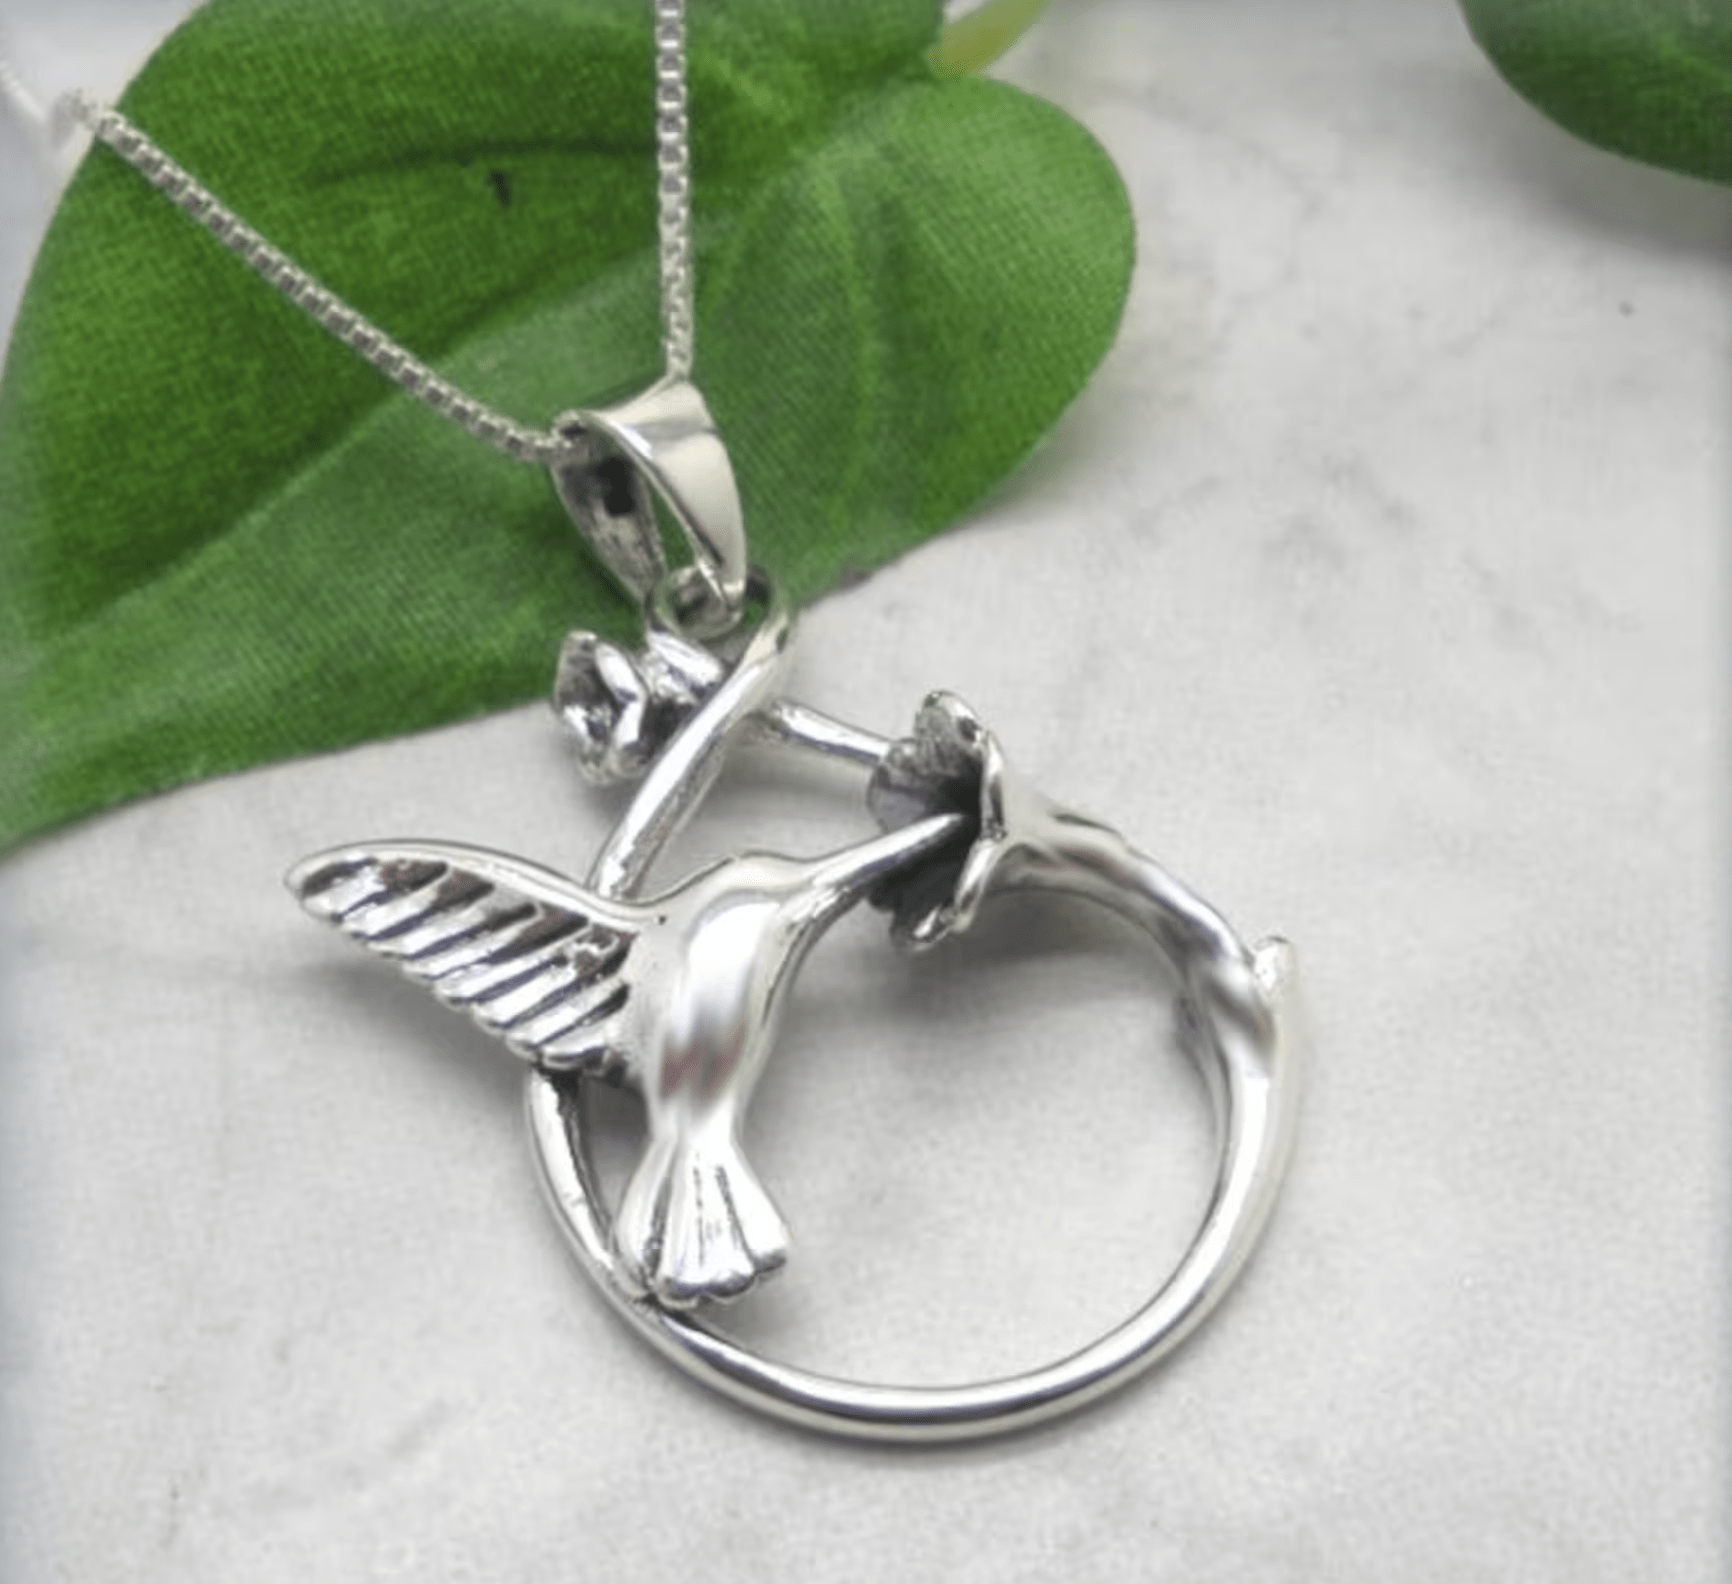 12 Hummingbird Necklaces and Jewelry Items From Etsy